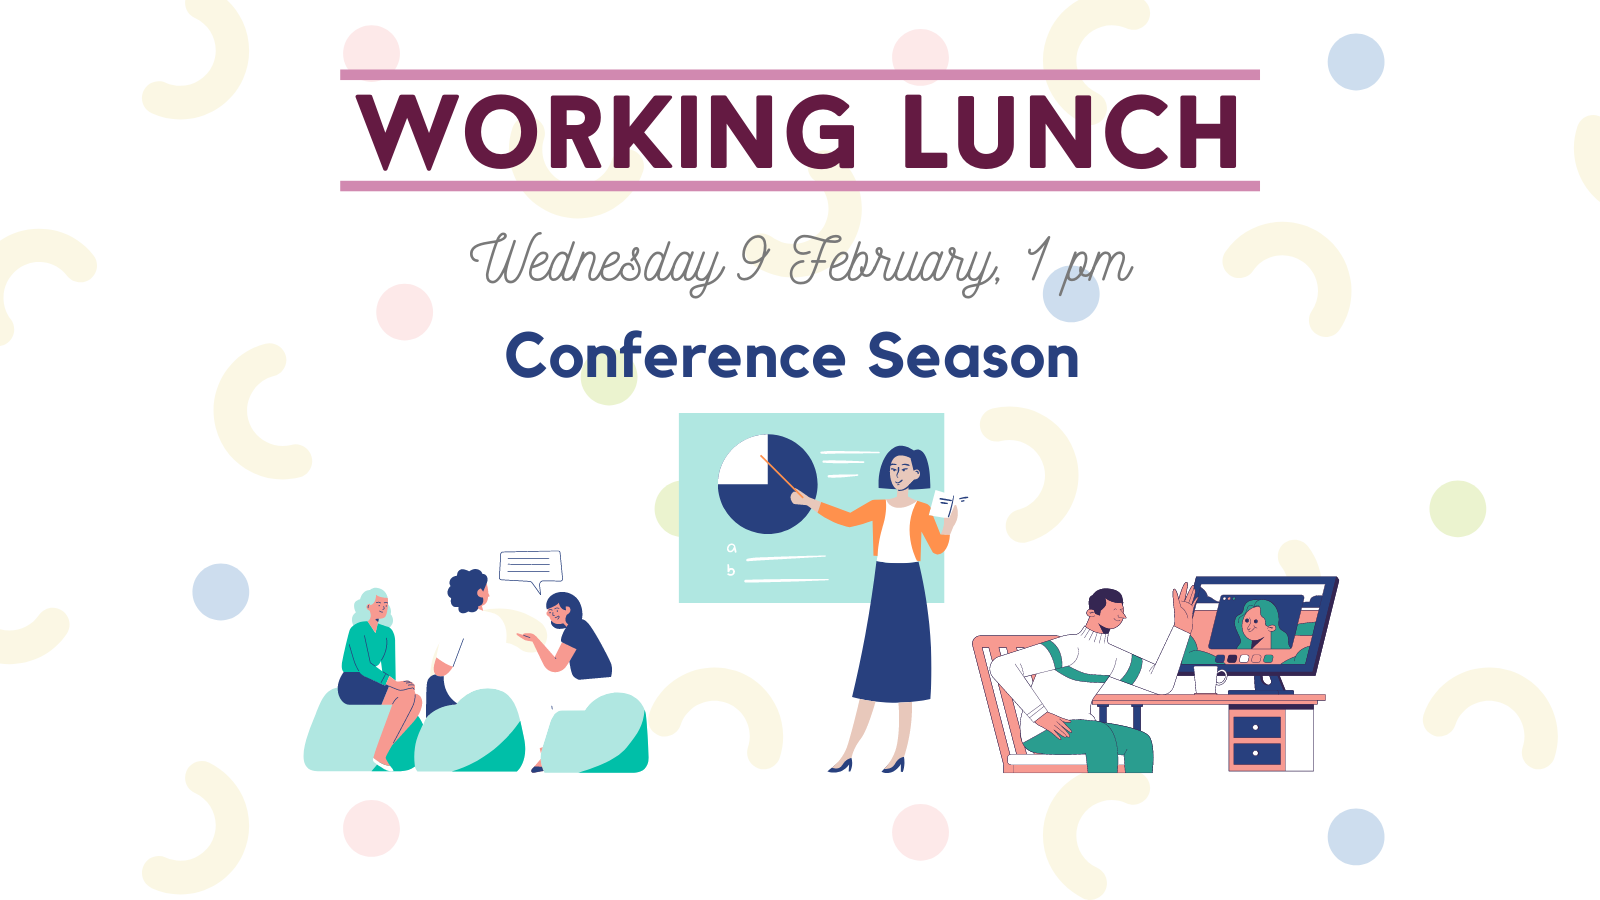 NWTN Working Lunch. The topic on 9th Feb, 2022 is conference season